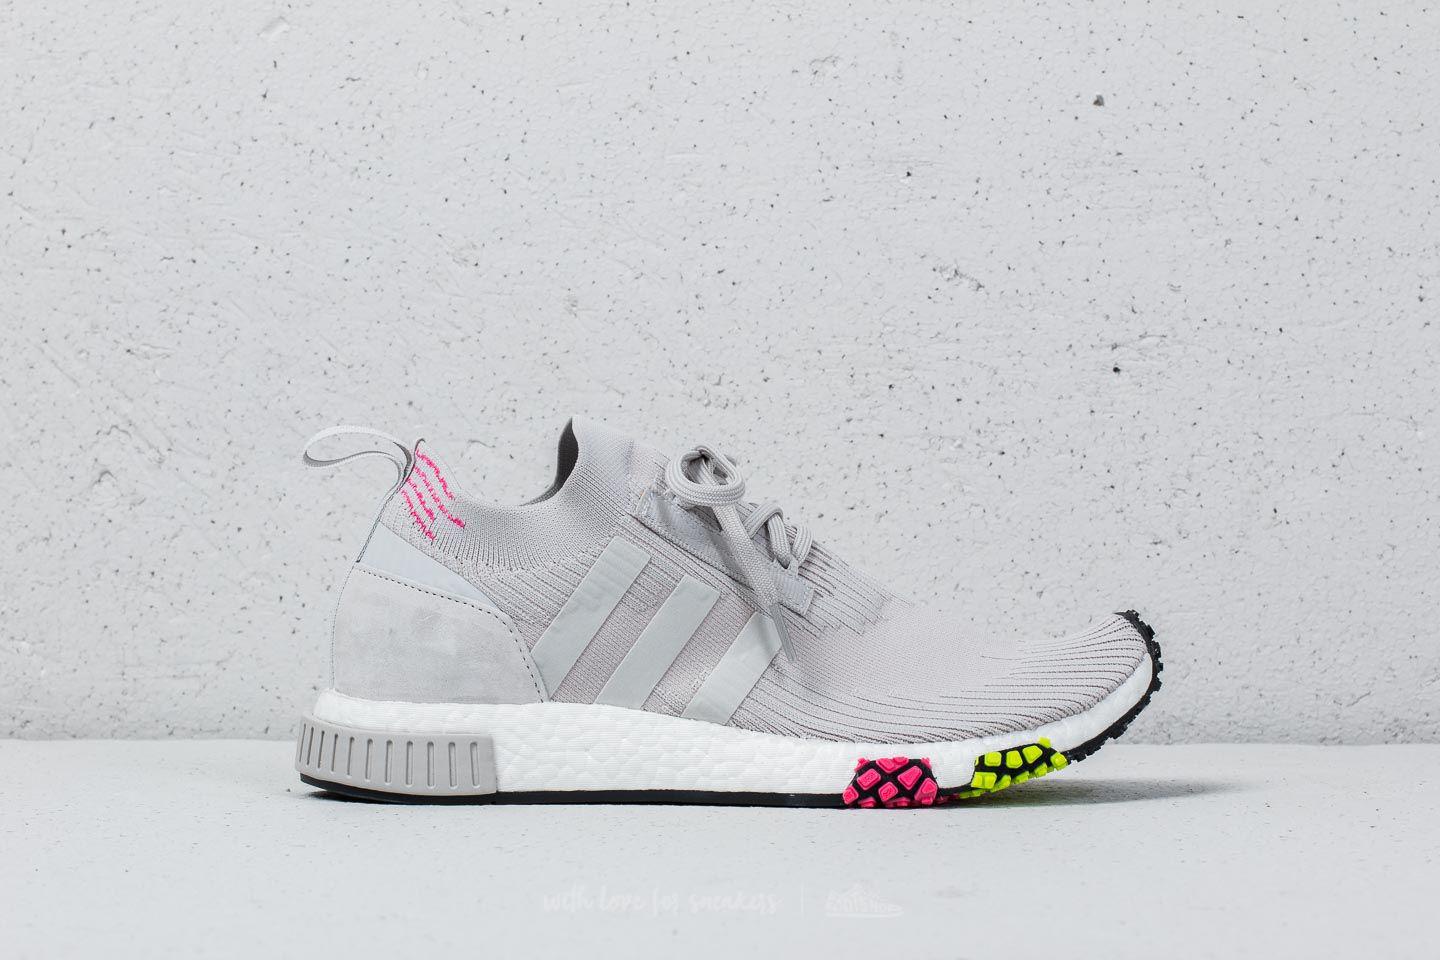 Adidas Originals Nmd Racer Primeknit Trainers Grey One/grey One/solar Pink  Discount, SAVE 34% - mpgc.net